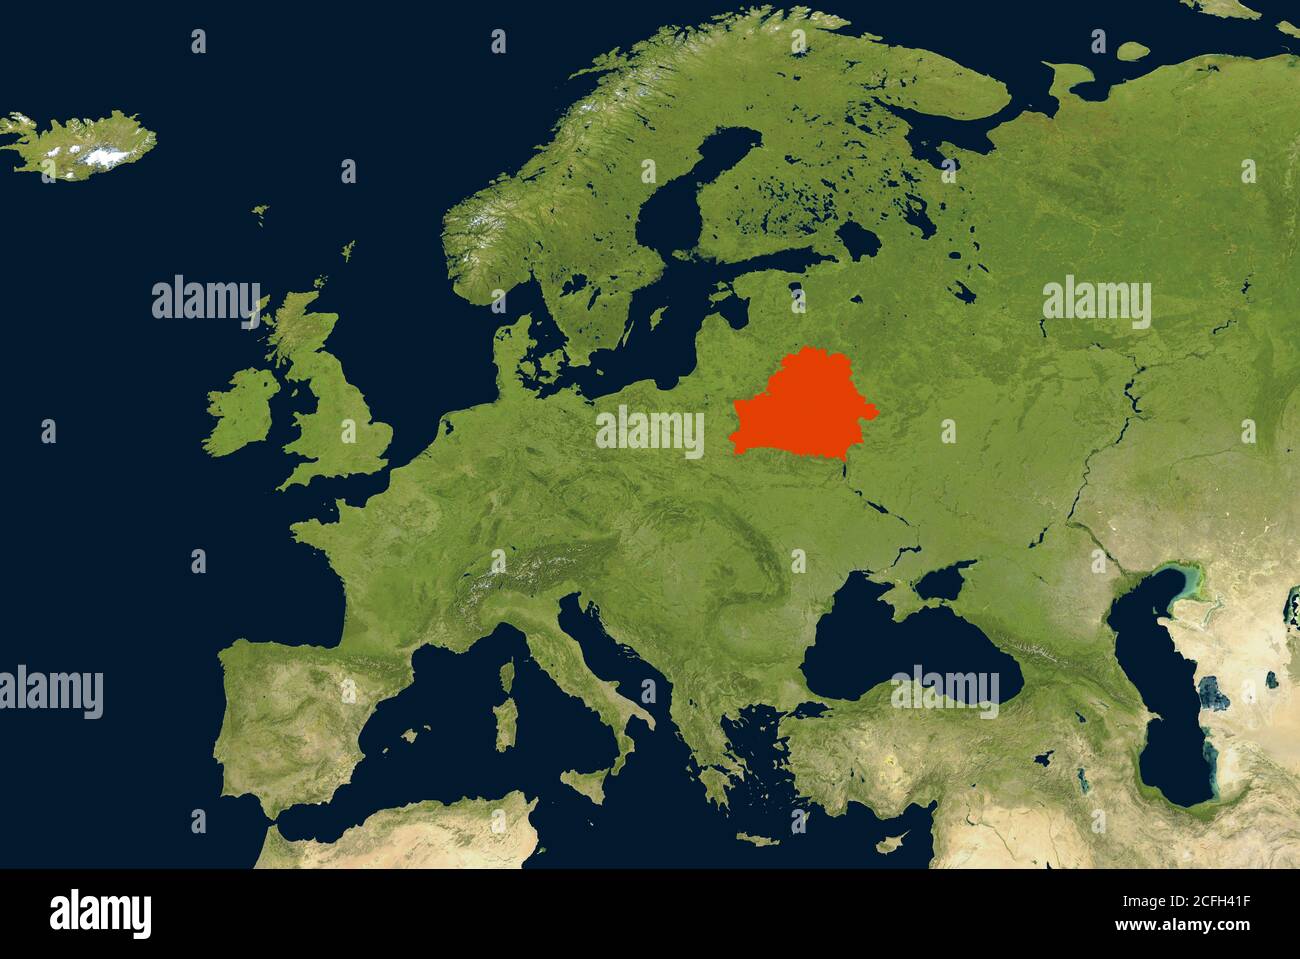 Belarus on physical map of Europe, detail of World geographic map from global satellite photo. European region on Earth flat image. Media news concept Stock Photo